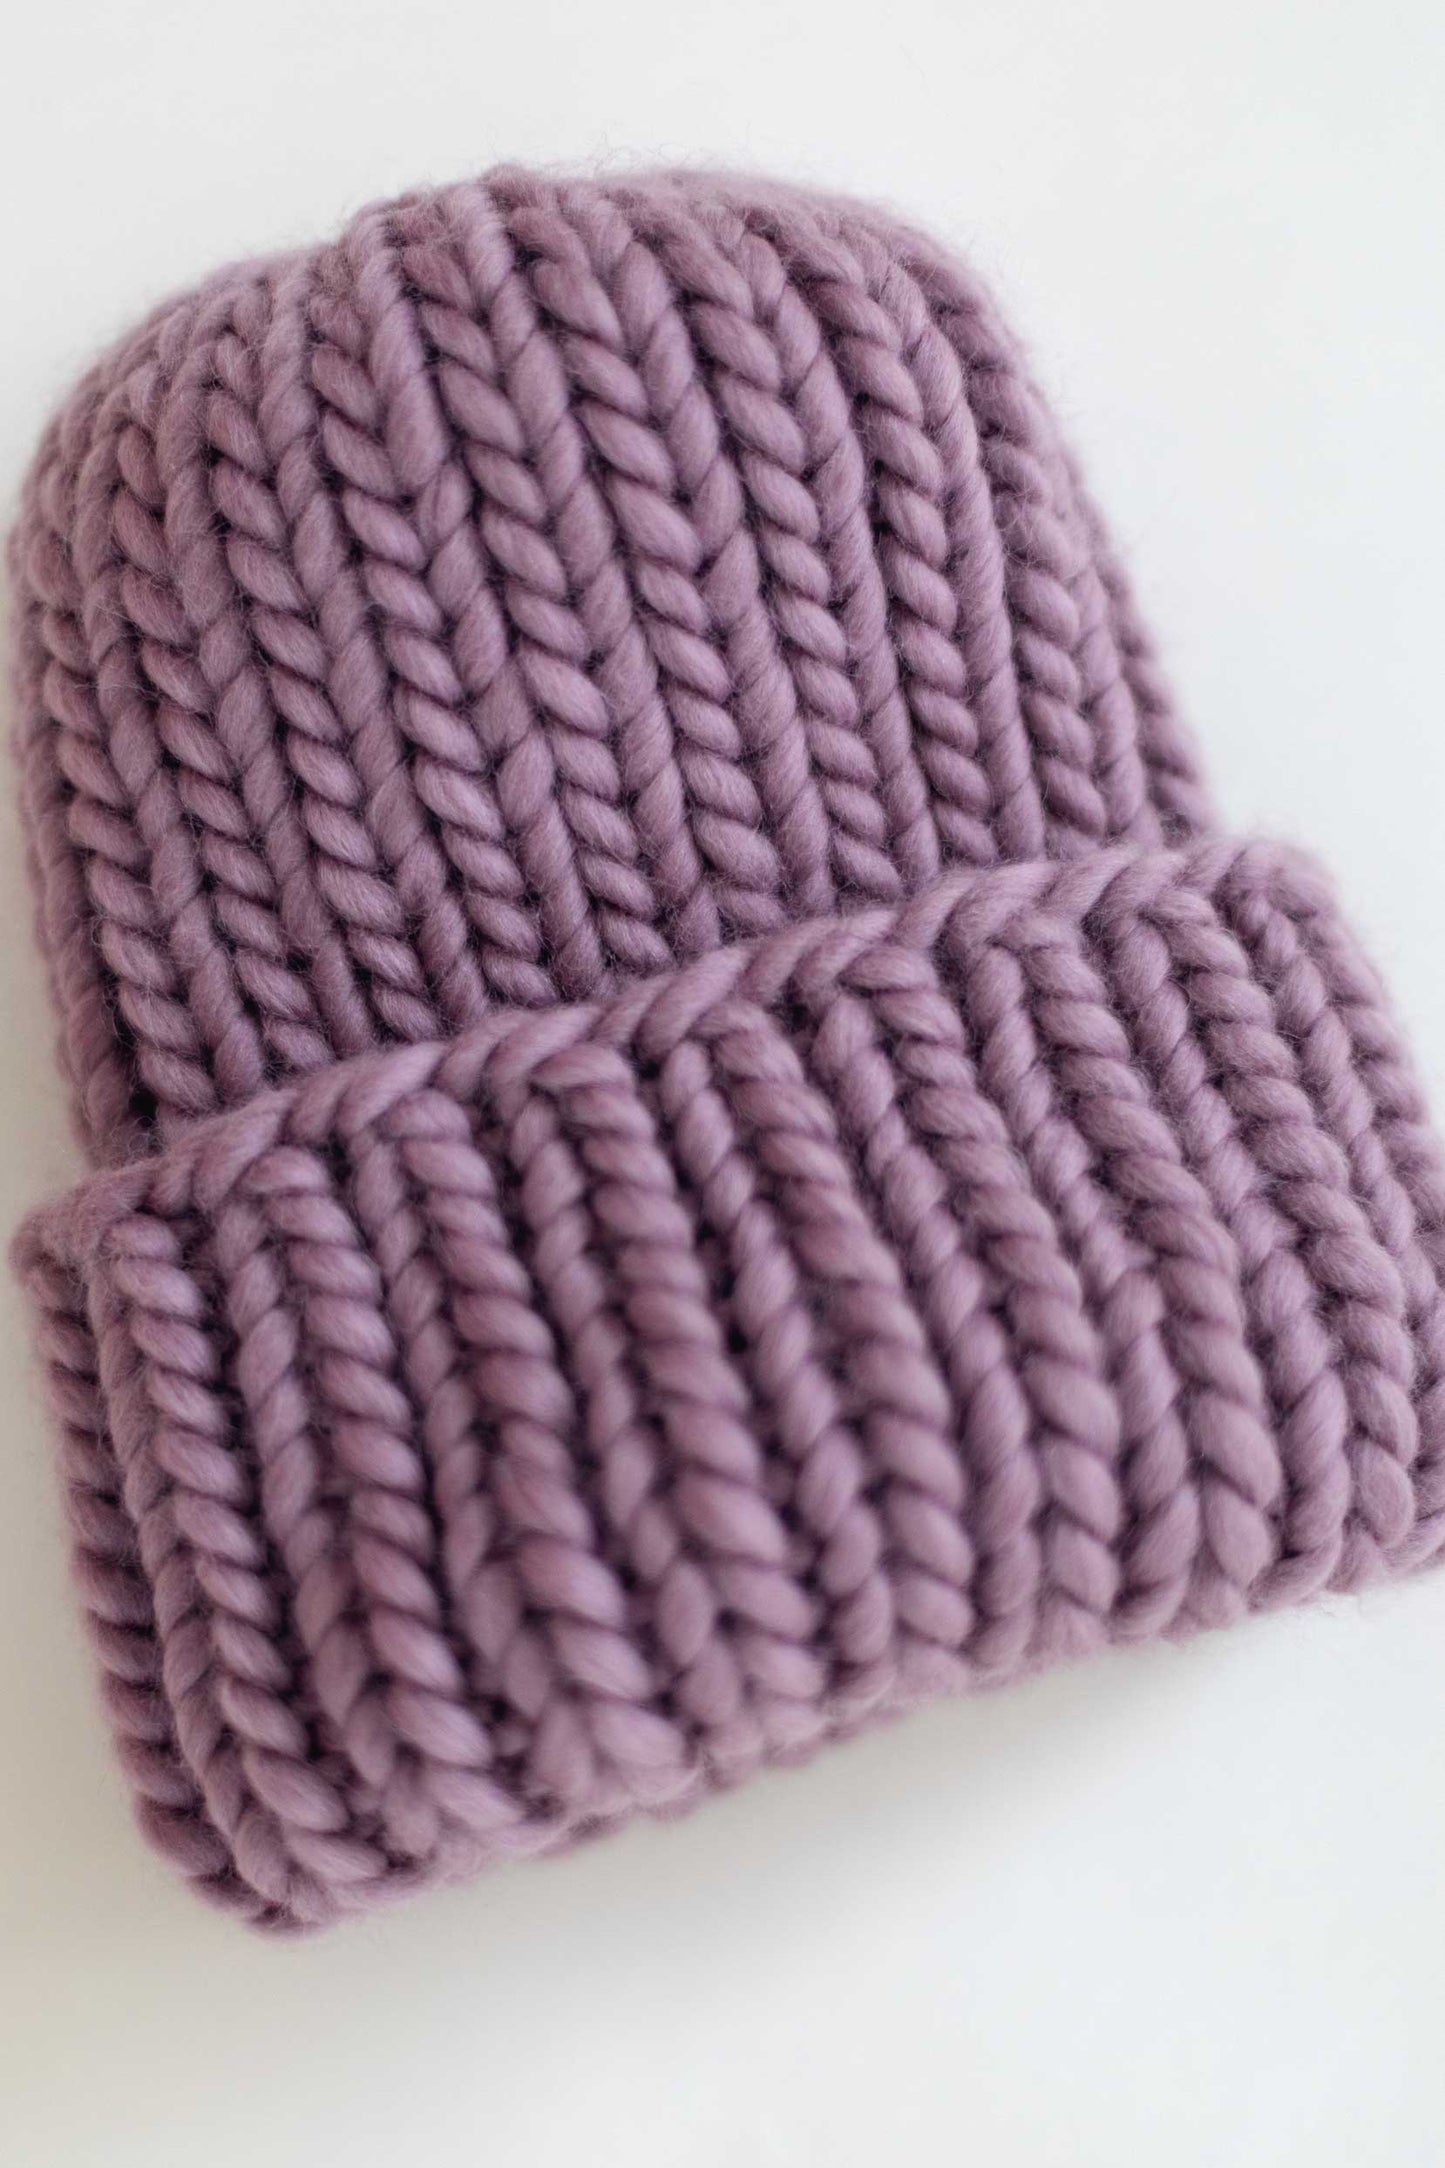 Chunky wool beanie, handmade in lavender color. A unique gift for a friend or family member or a great addition to your winter wardrobe. 